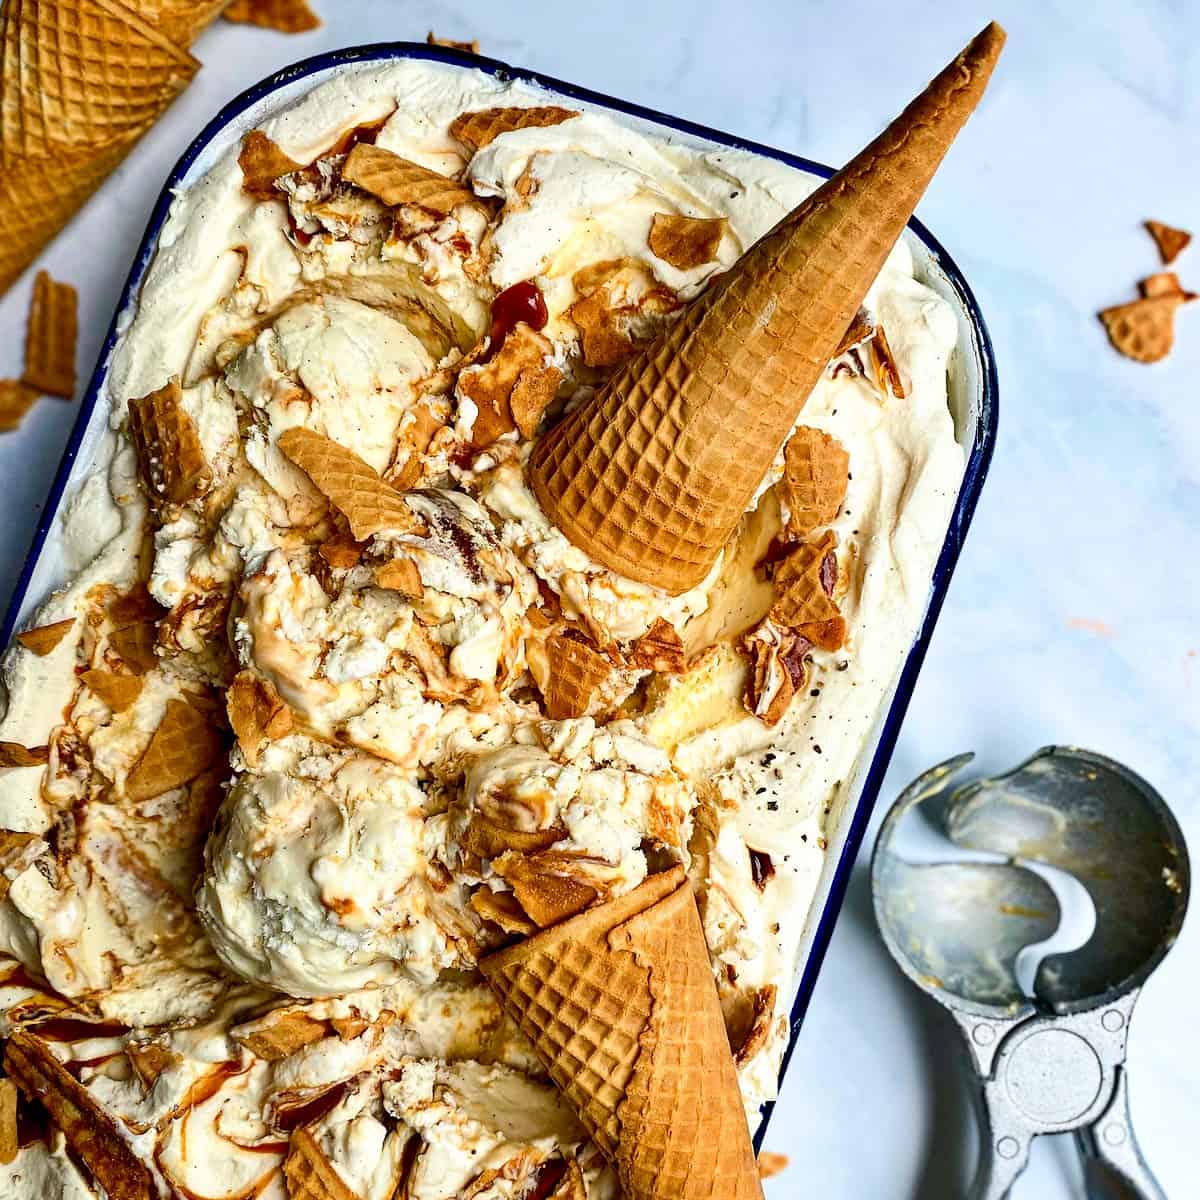 A pan, filled with Black Pepper Caramel No-Churn Ice Cream, with ice cream cones.